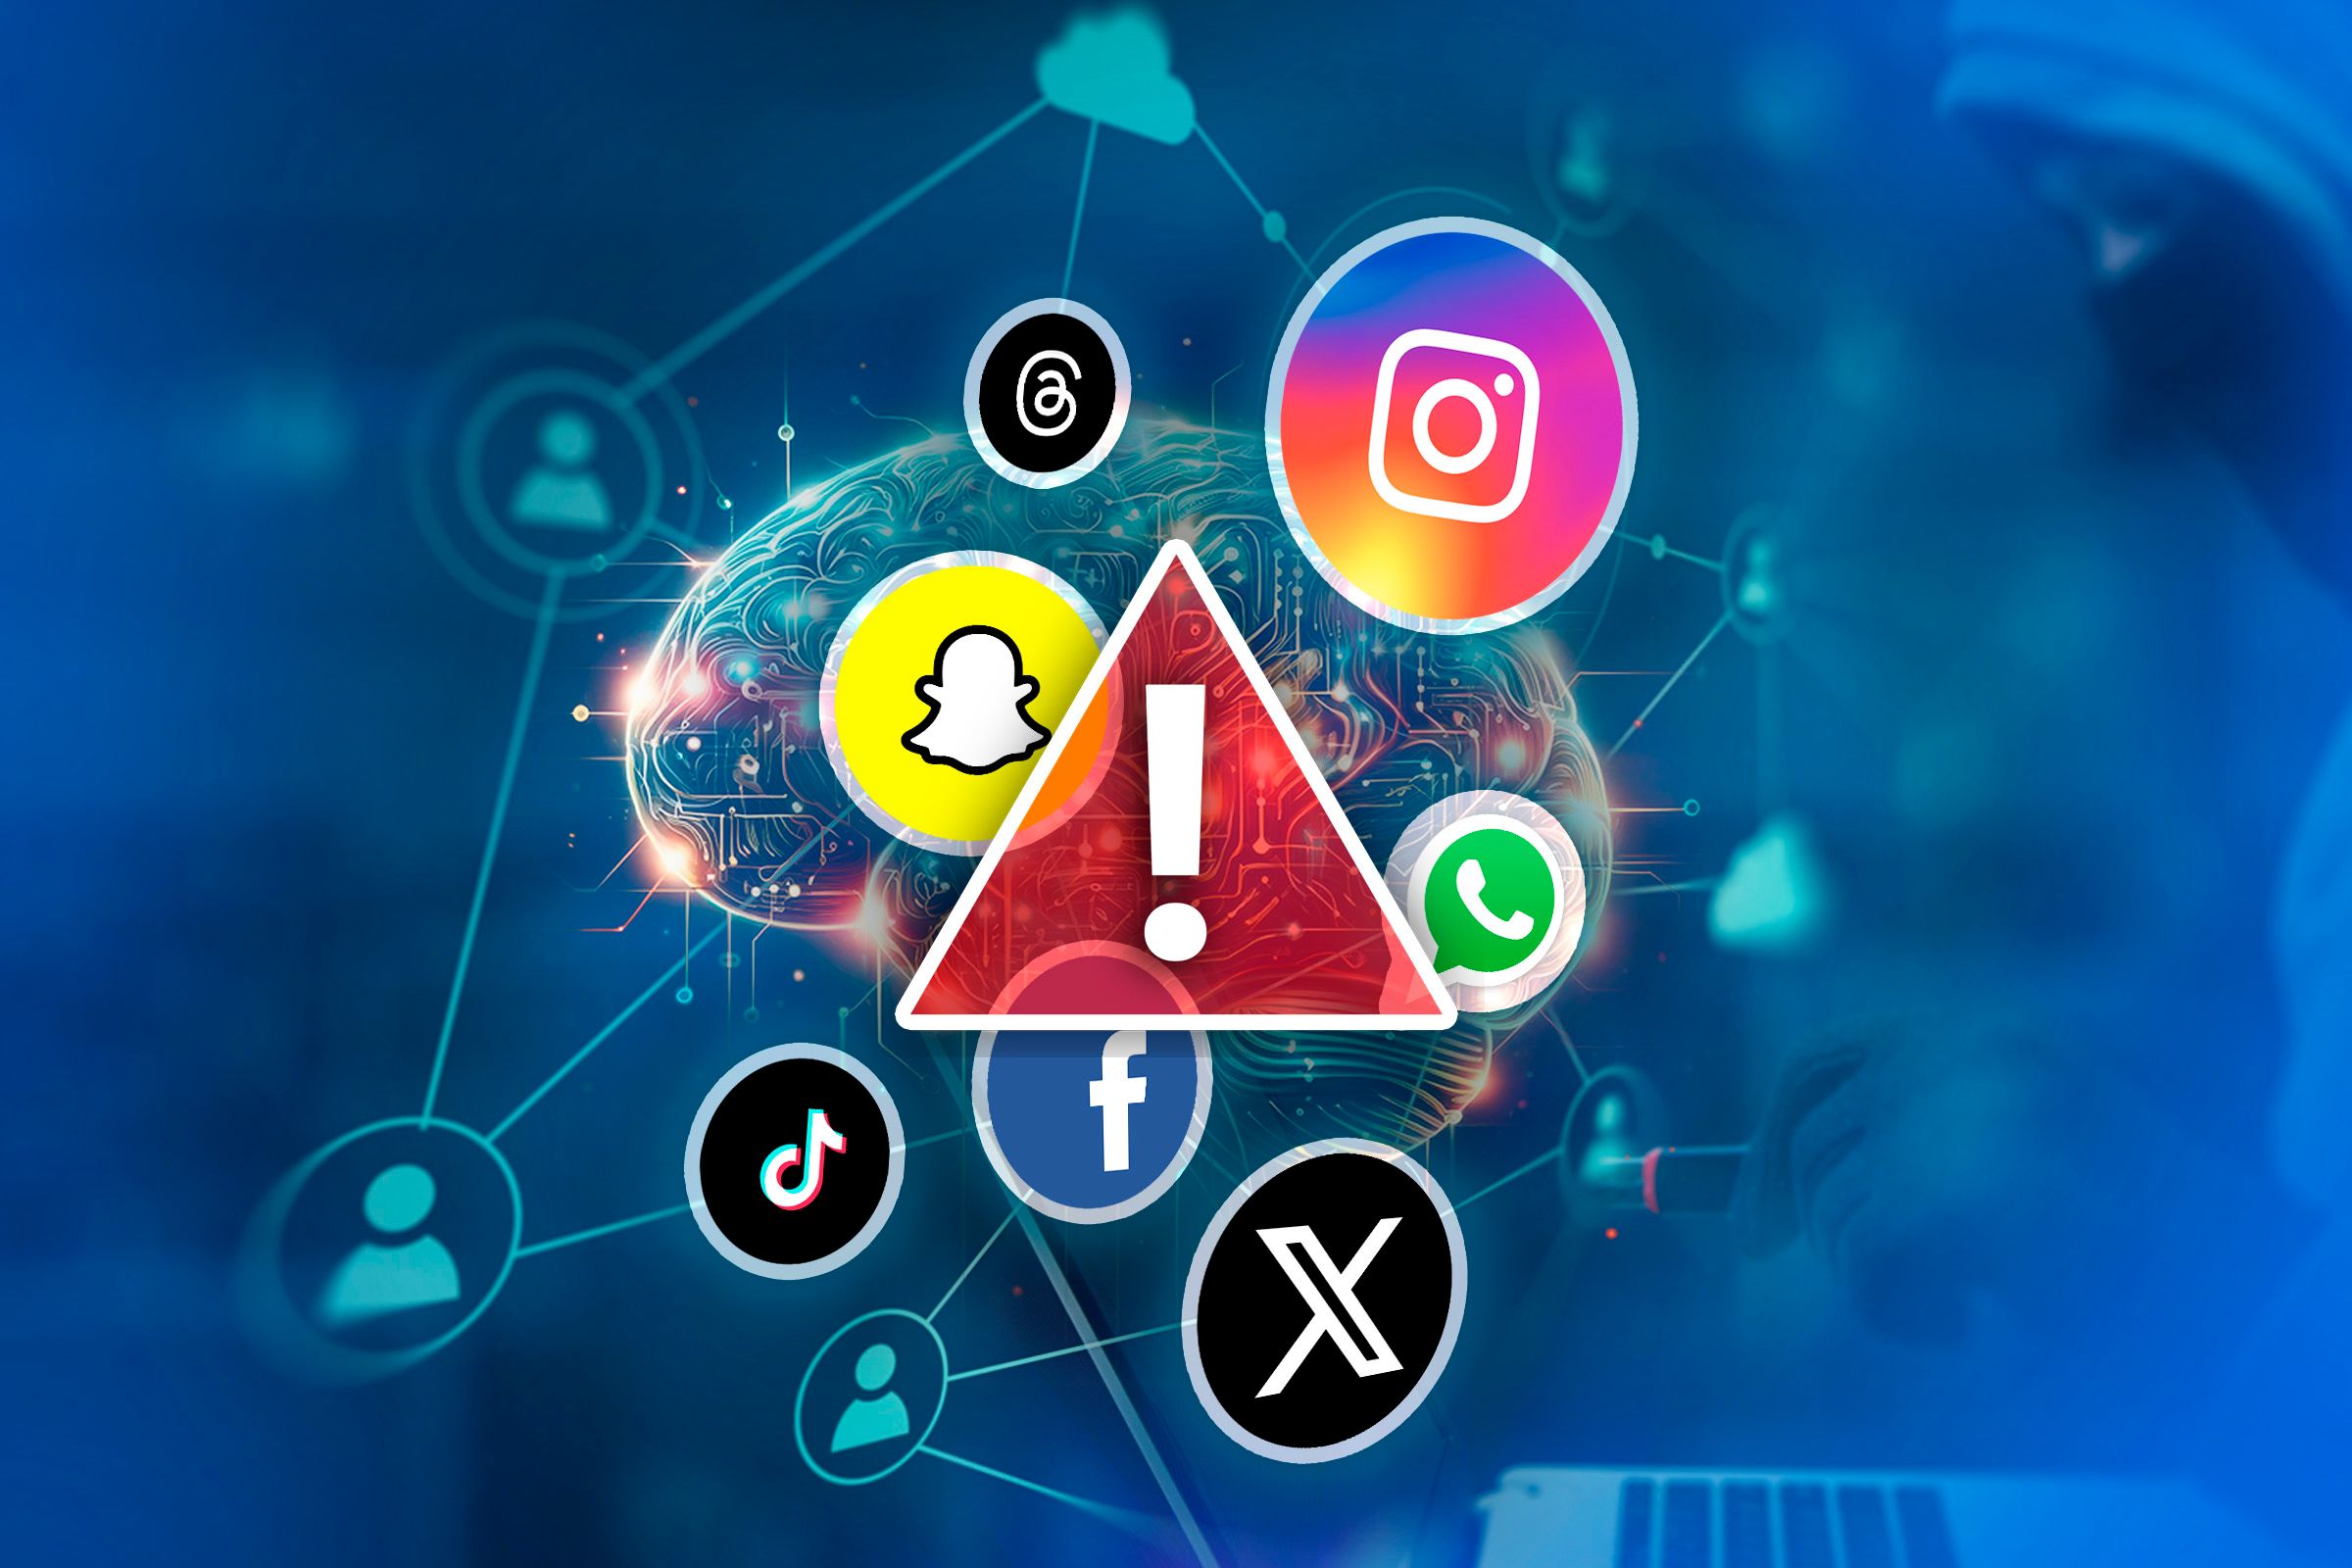 An alert icon with social media logos in the background connected in a chain.